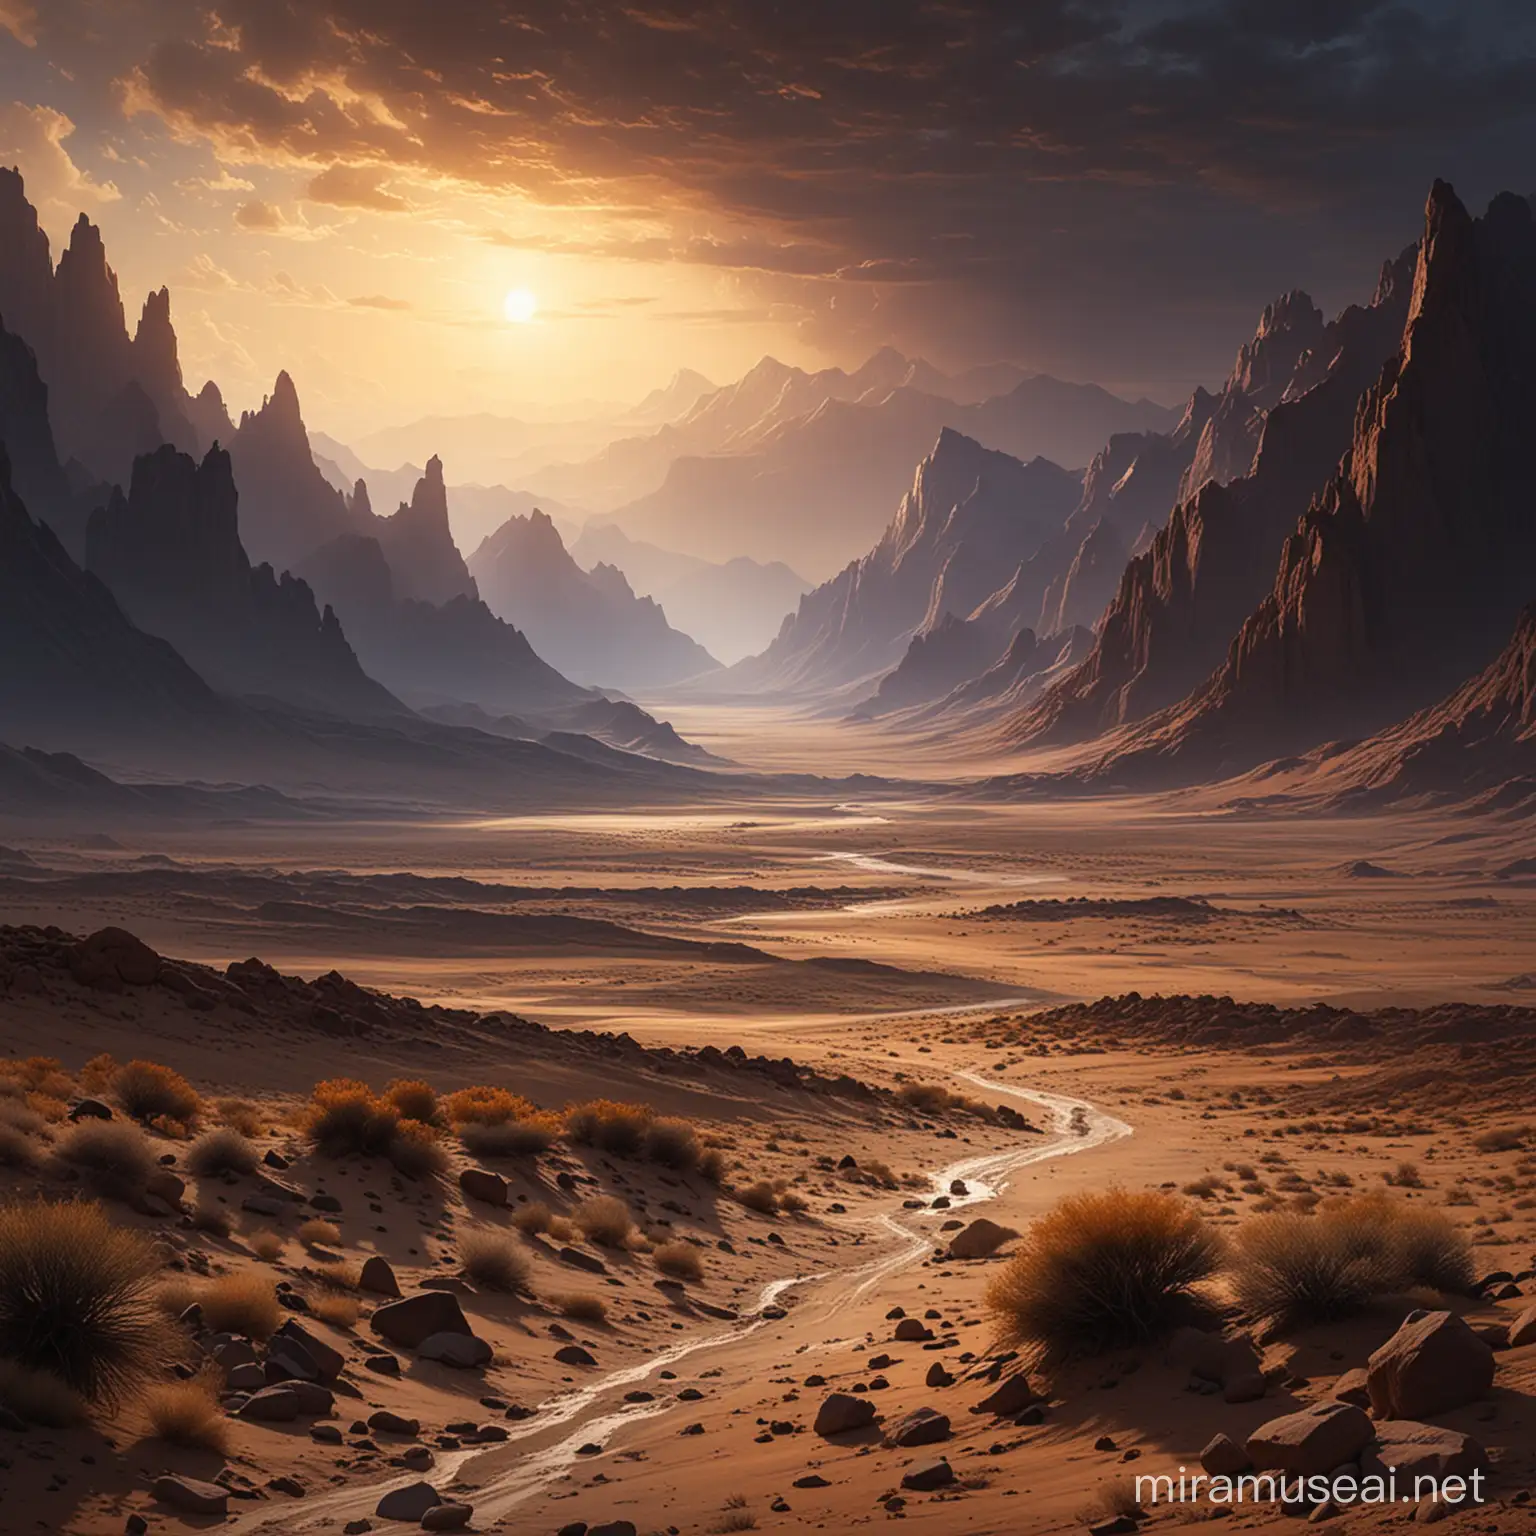 Amidst a desolate landscape of stark contrasts, where towering mountains meet the endless expanse of a barren desert, paint a scene where the clash of light and darkness creates an otherworldly panorama.